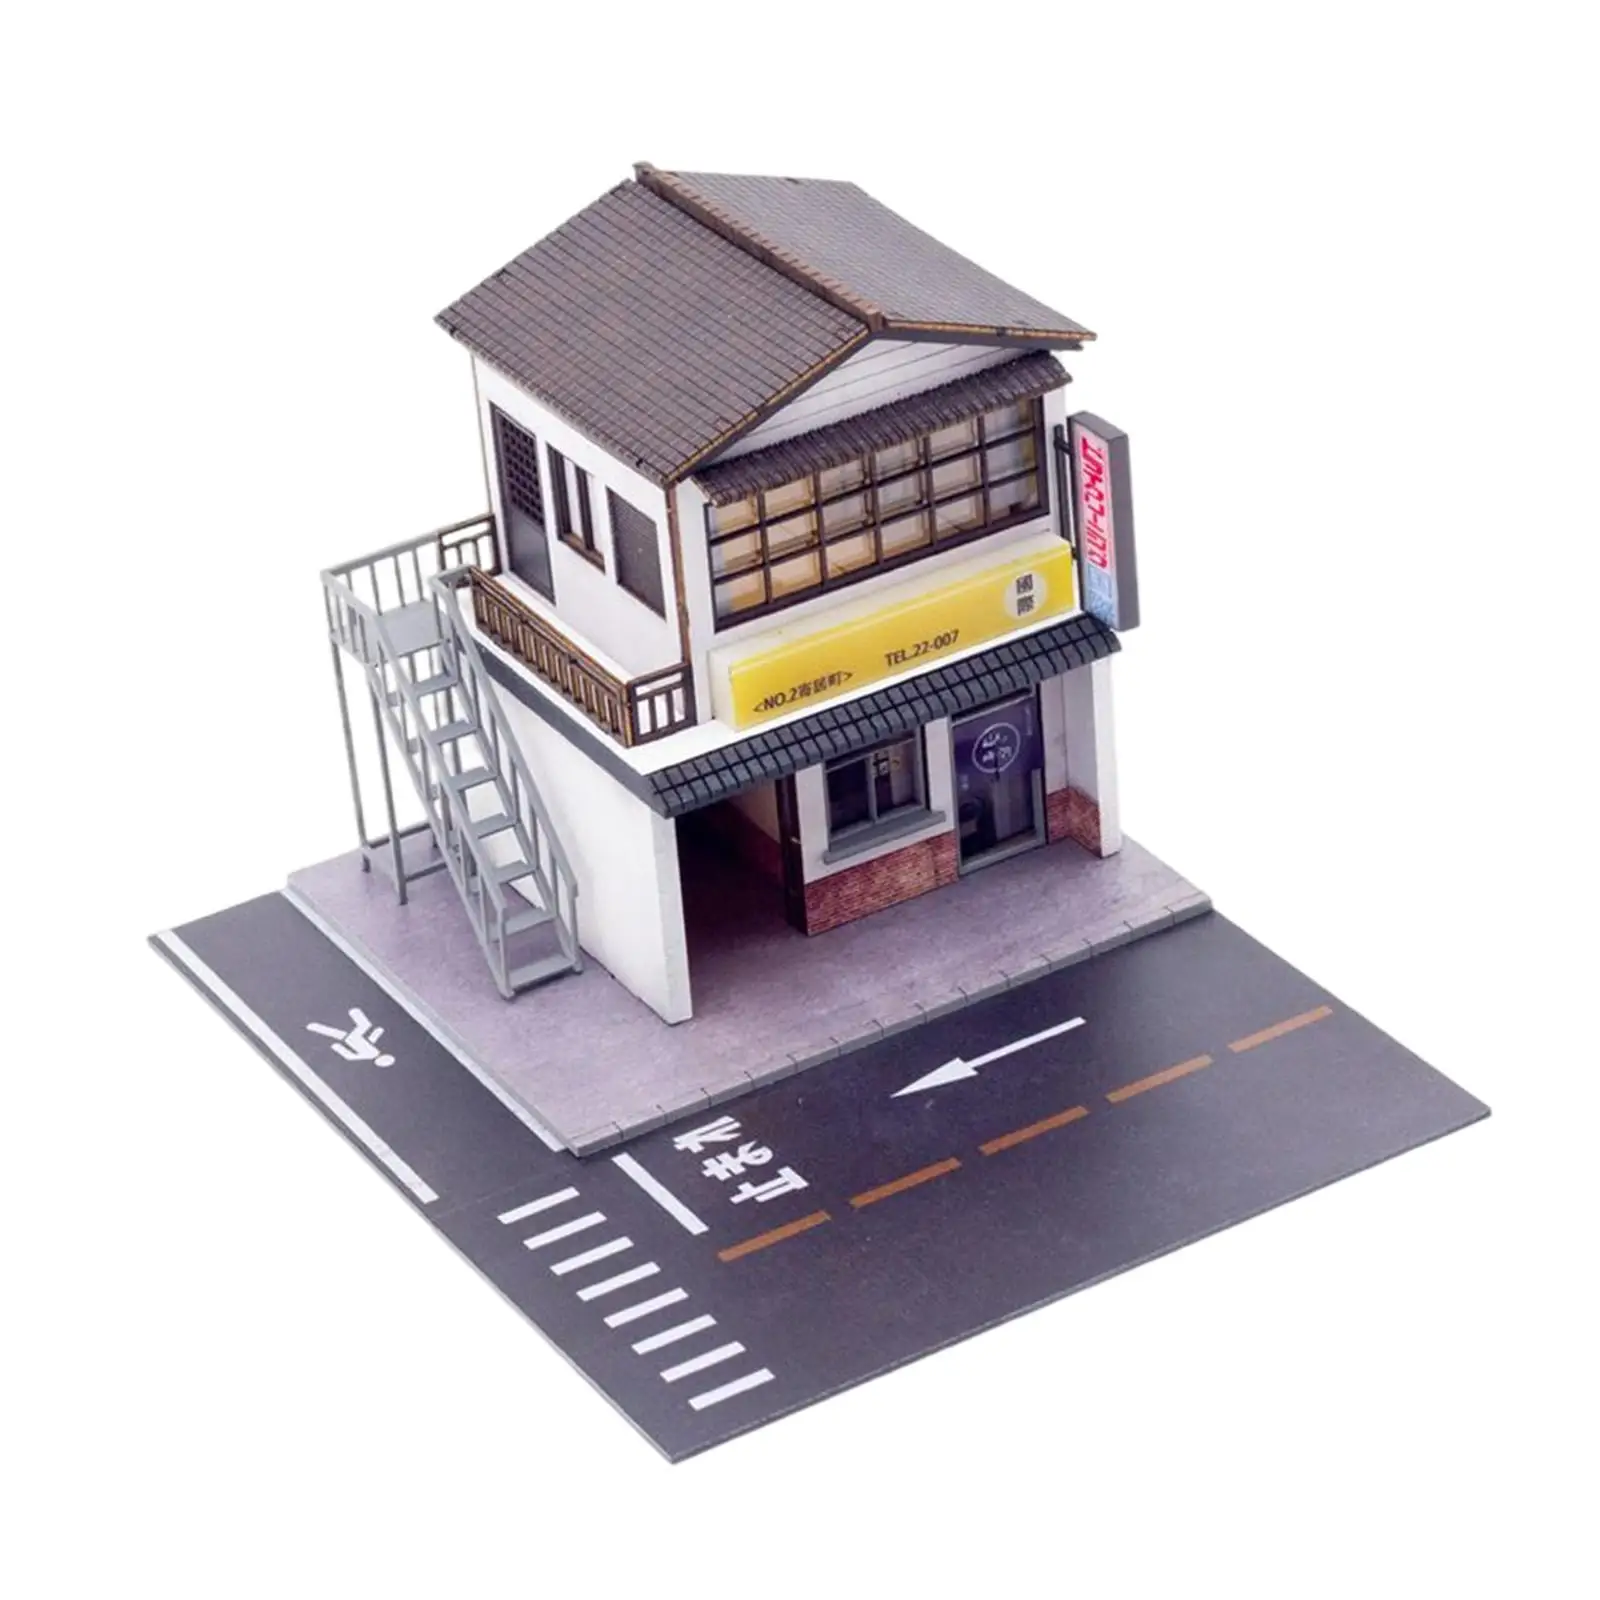 Miniature 1:64 Scale Dry Cleaners Diorama,City DIY Model Layout,Office Desktop Sand Table,Home Scenery Toy Collection Gifts